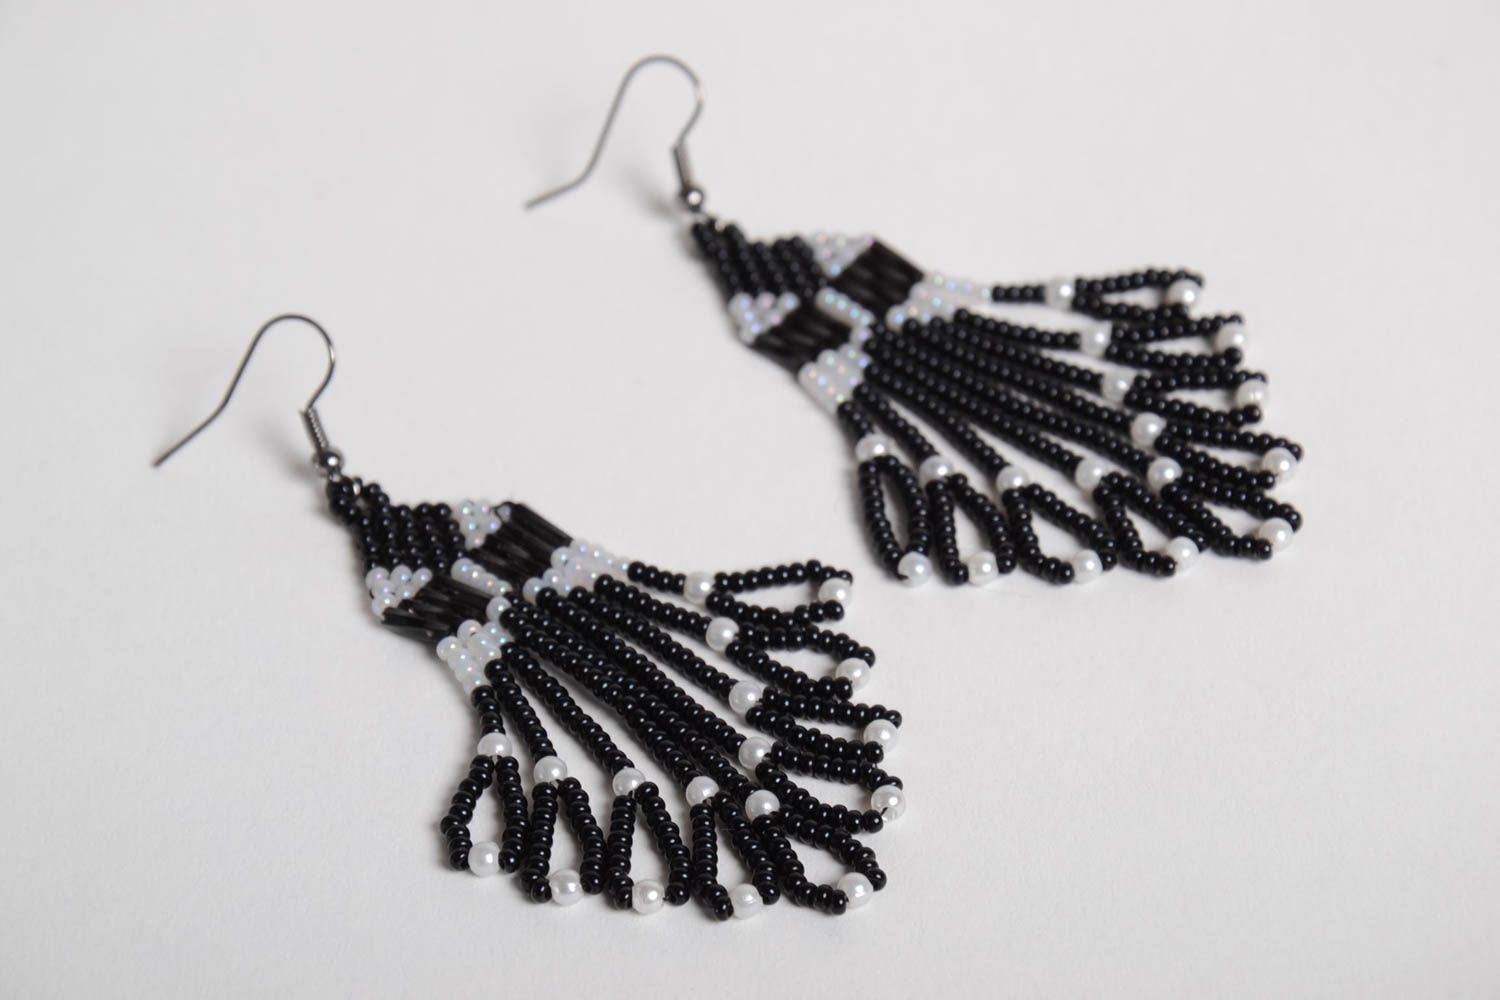 Handmade beaded earrings black and white accessory designer earrings with charms photo 3